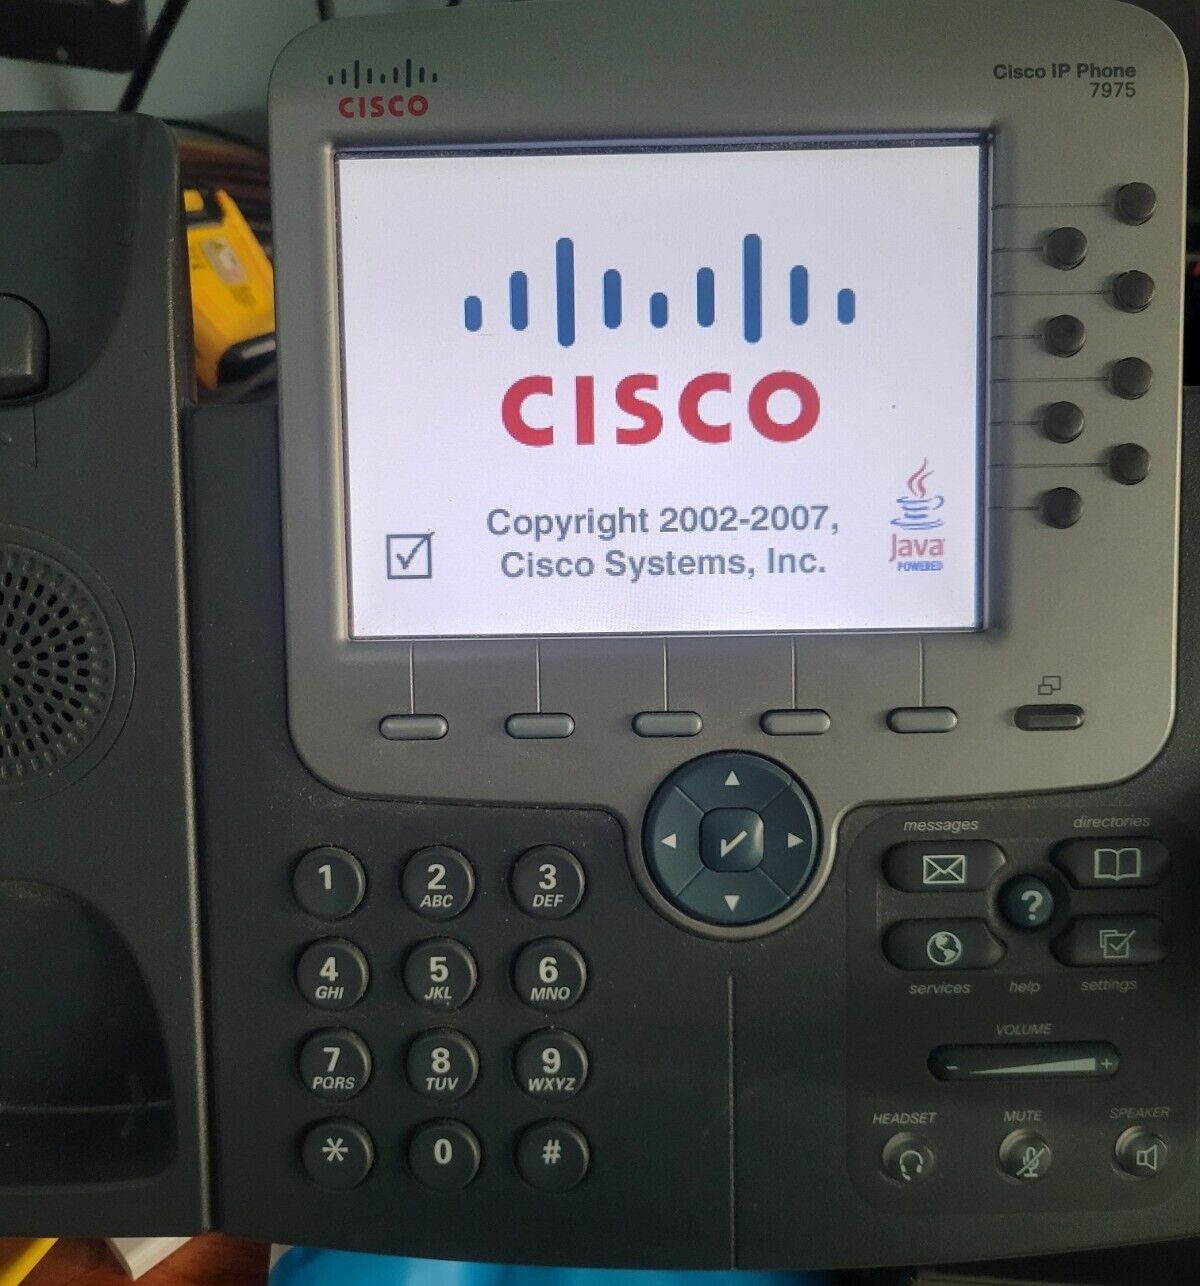 Cisco 7975 (CP-7975G) VoIP IP Phone , Color screen